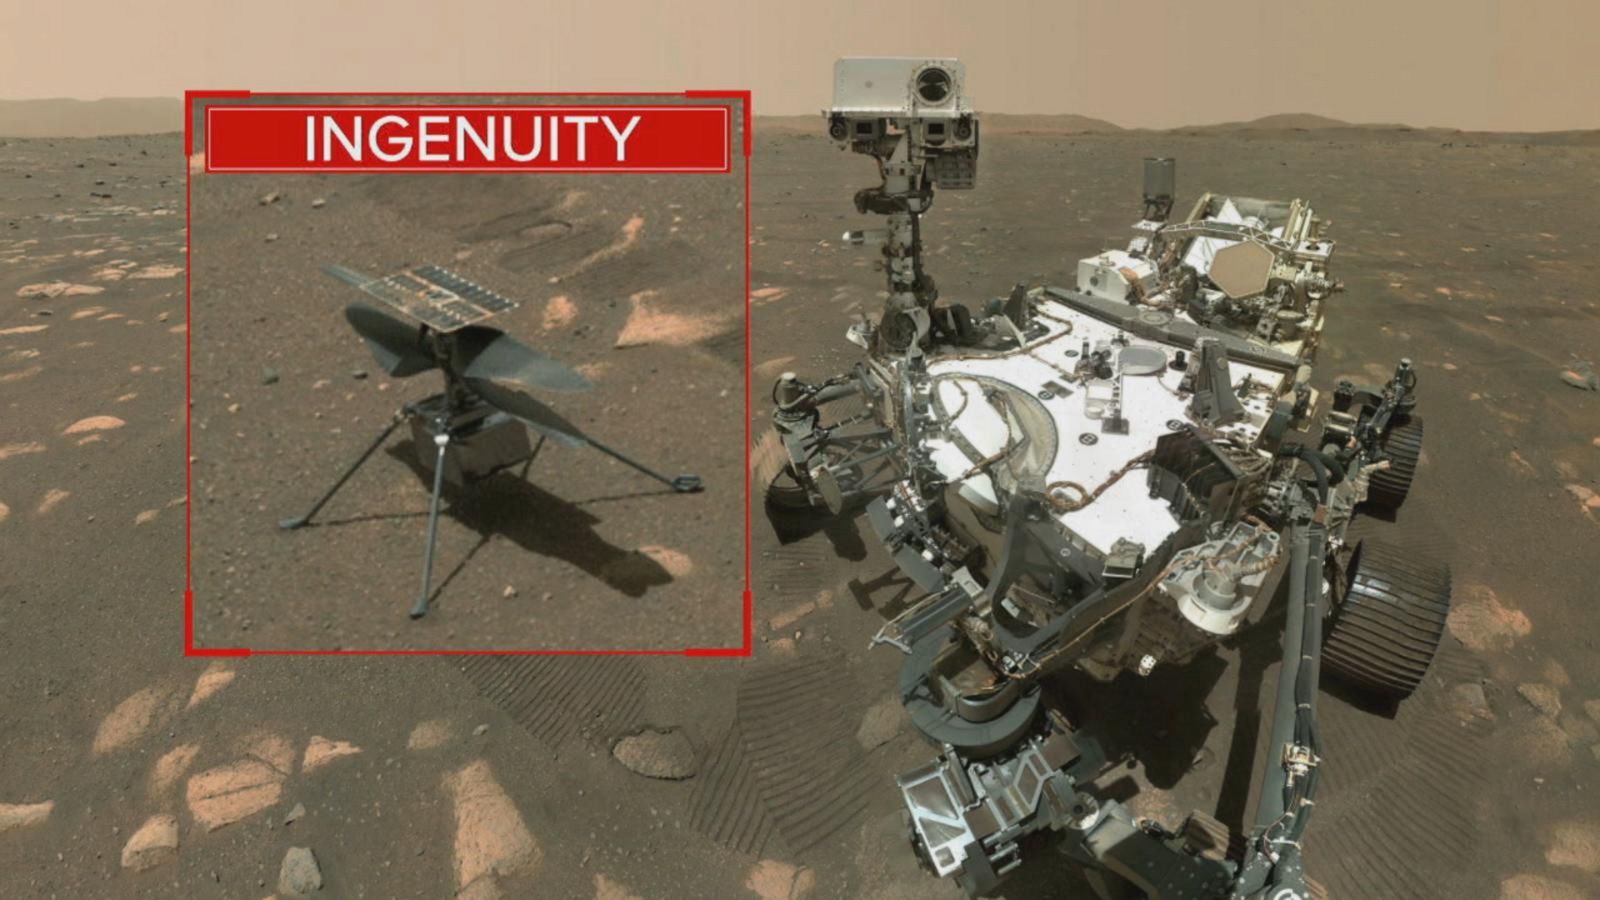 NASA reschedules the flight of Ingenuity Mars Helicopter - Good Morning ...